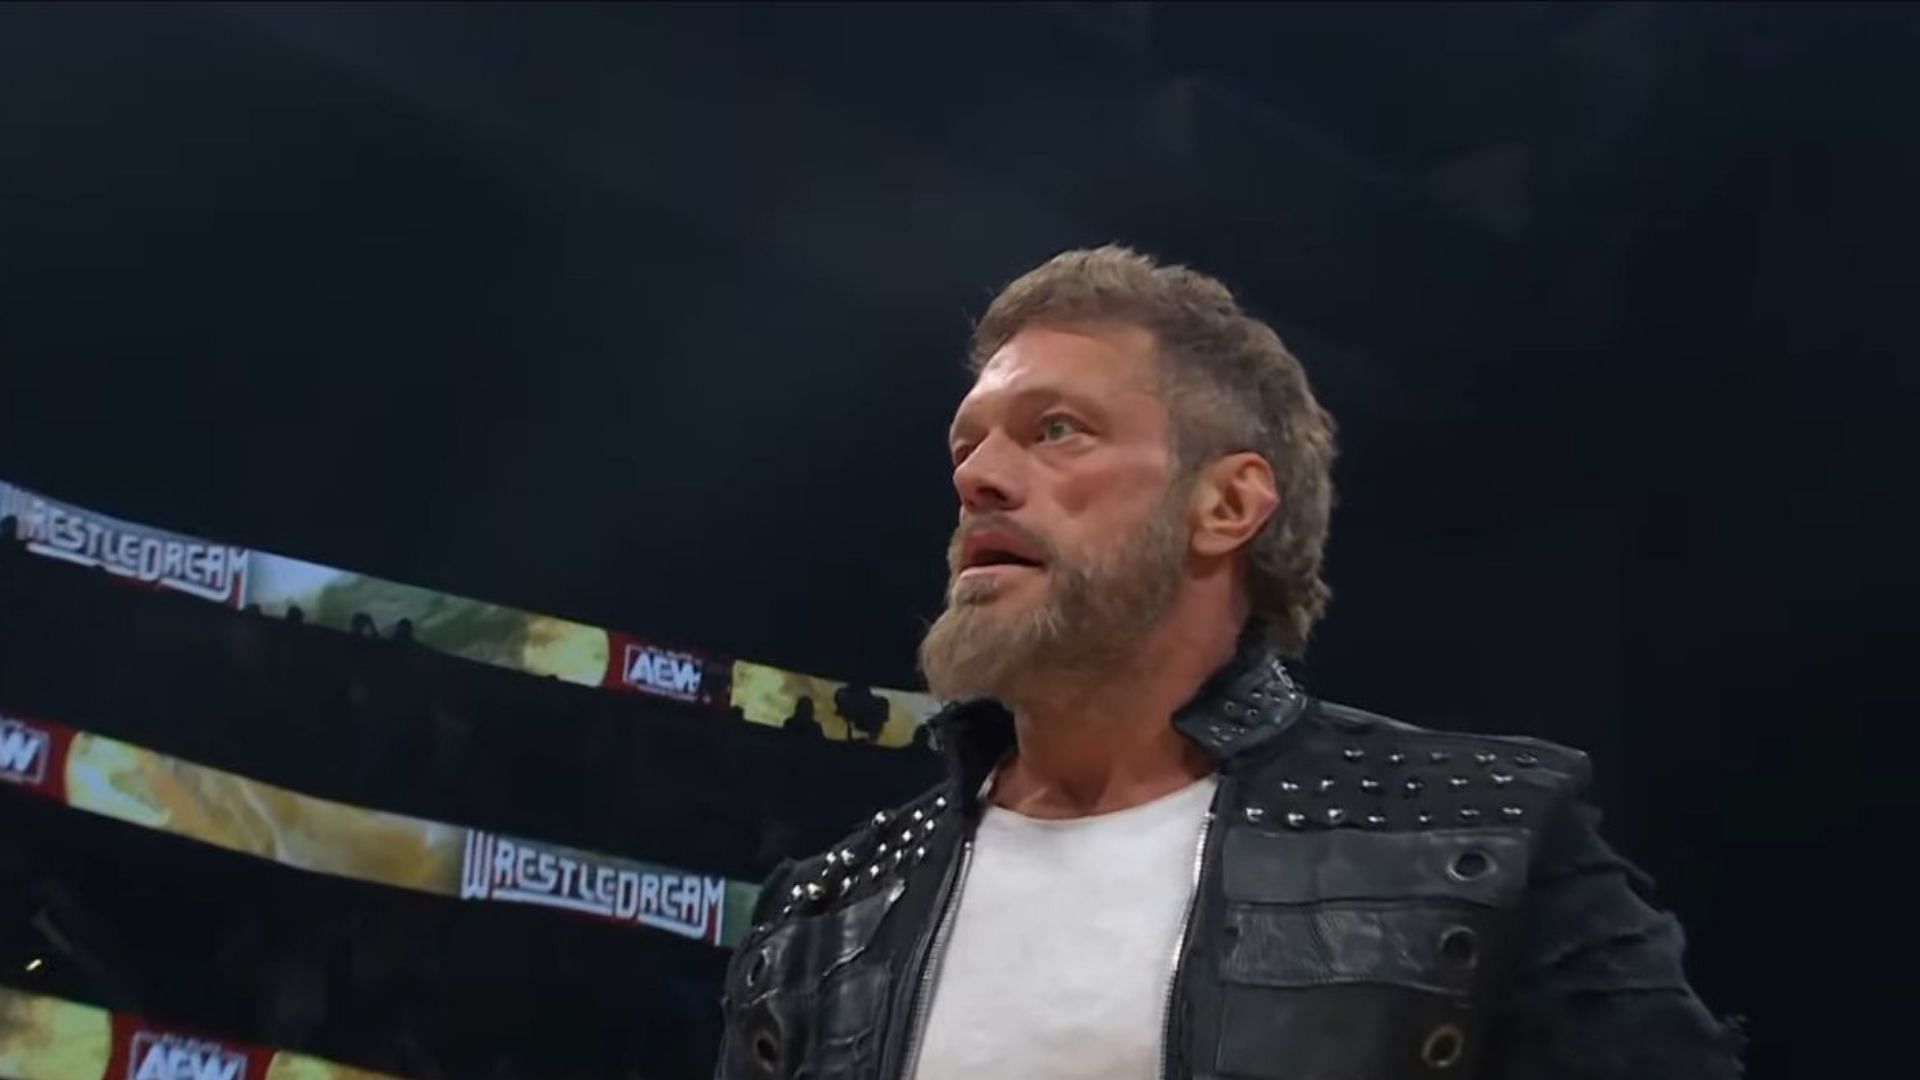 Edge has just made his AEW debut tonight at WrestleDream